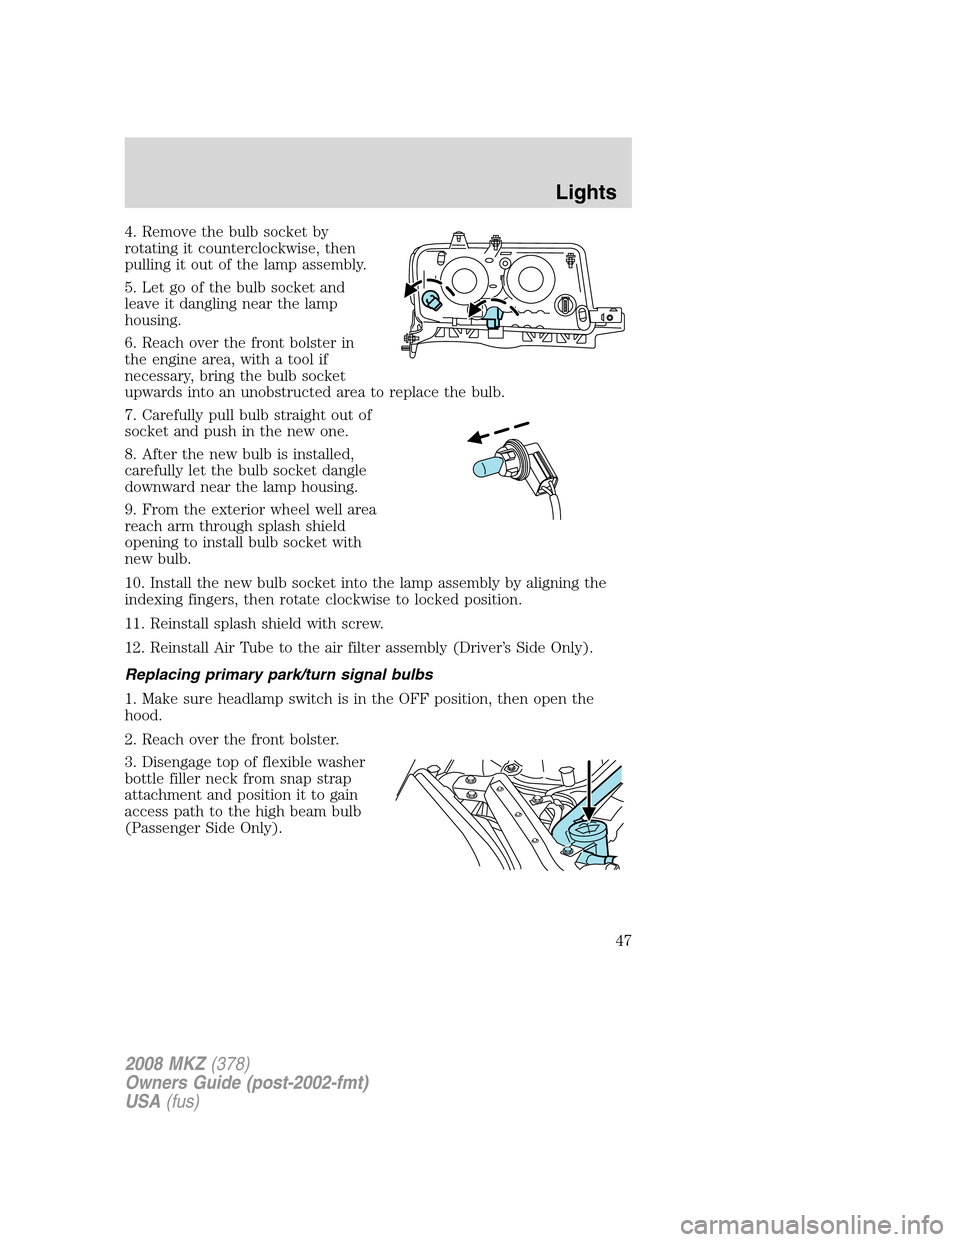 LINCOLN MKZ 2008 Service Manual 4. Remove the bulb socket by
rotating it counterclockwise, then
pulling it out of the lamp assembly.
5. Let go of the bulb socket and
leave it dangling near the lamp
housing.
6. Reach over the front b